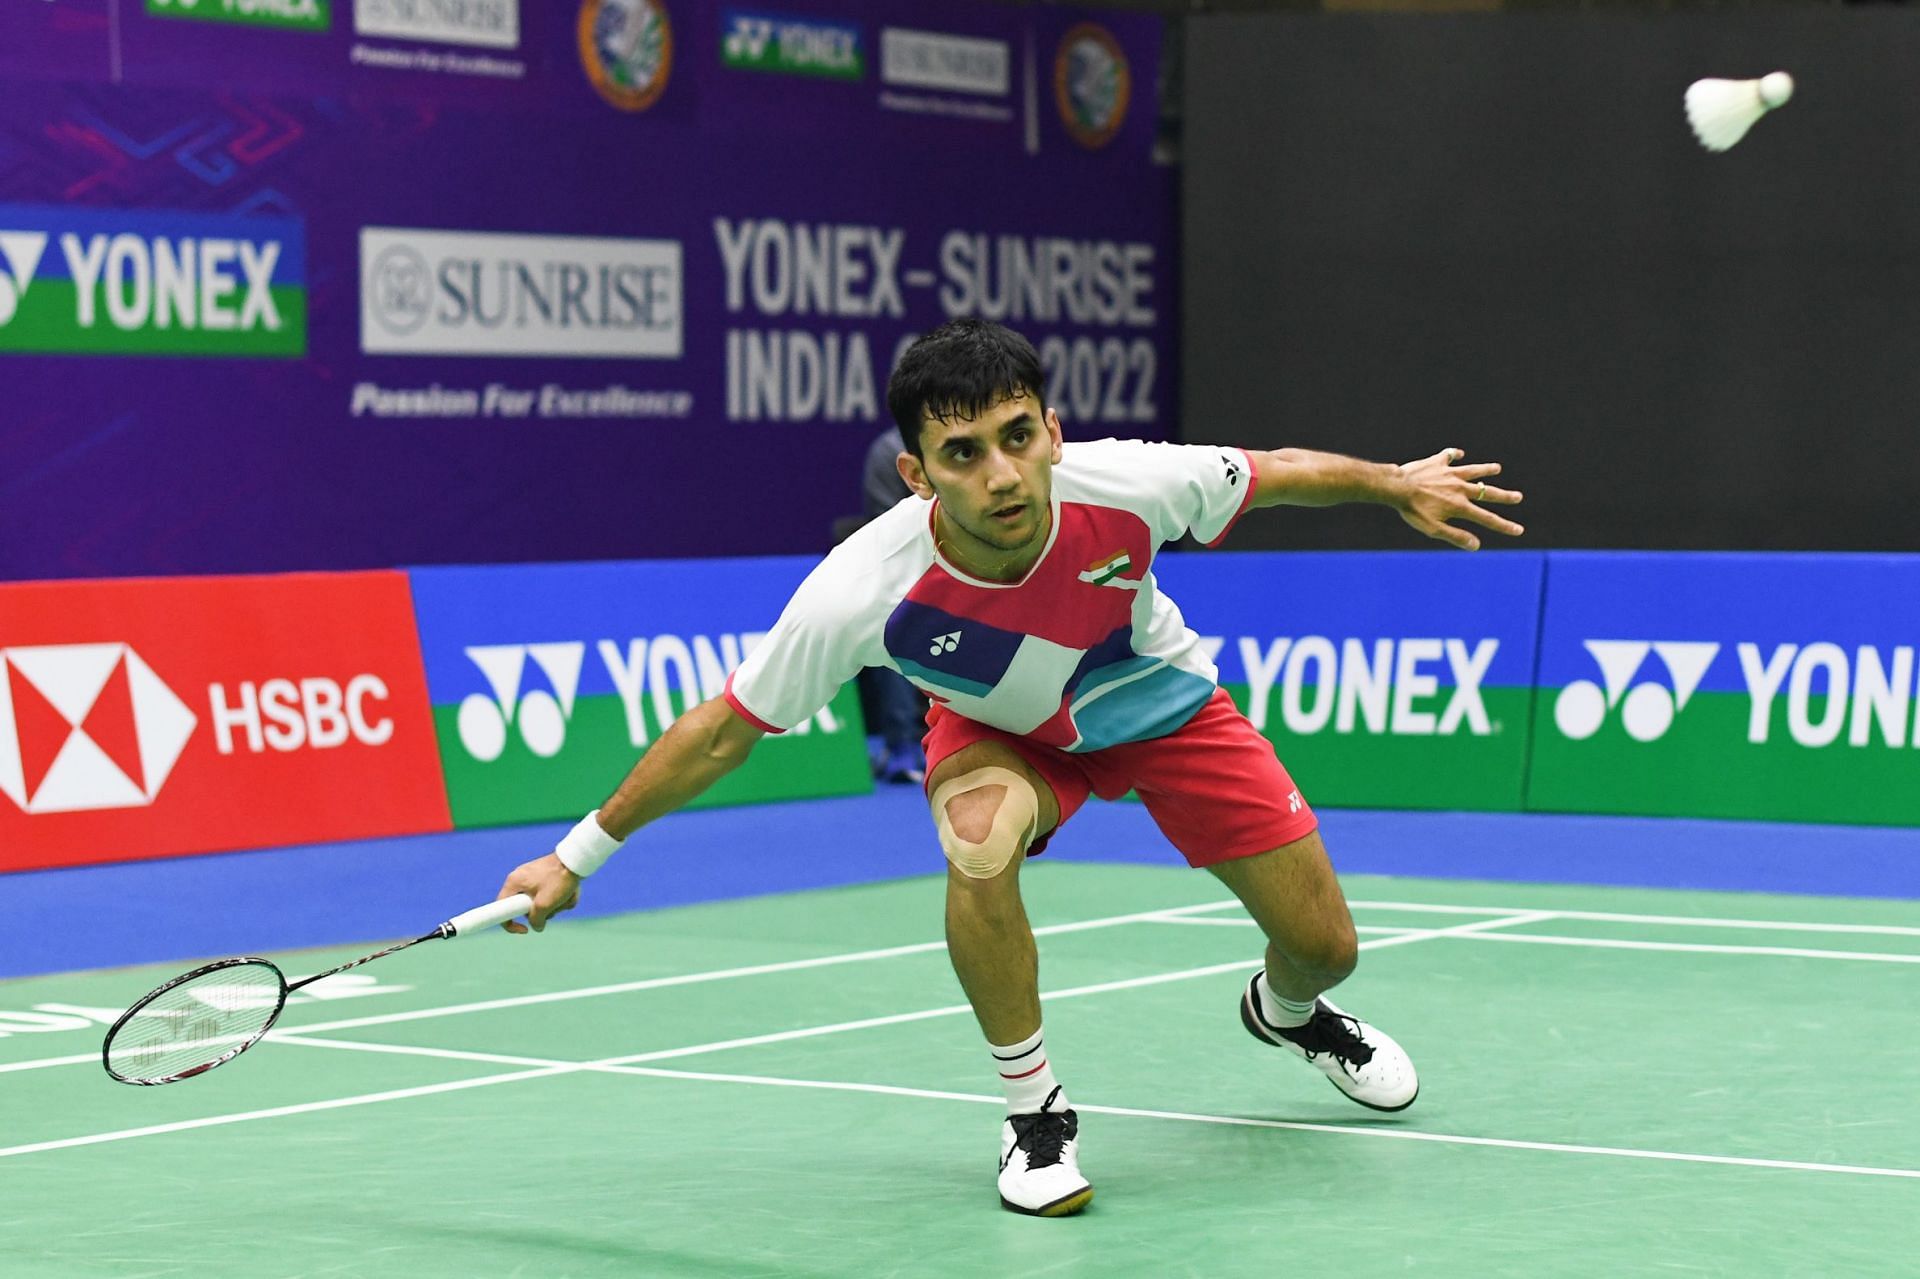 Indonesia Open 2022 Lakshya Sen vs HS Prannoy preview, head-to-head, prediction, channel and live streaming details